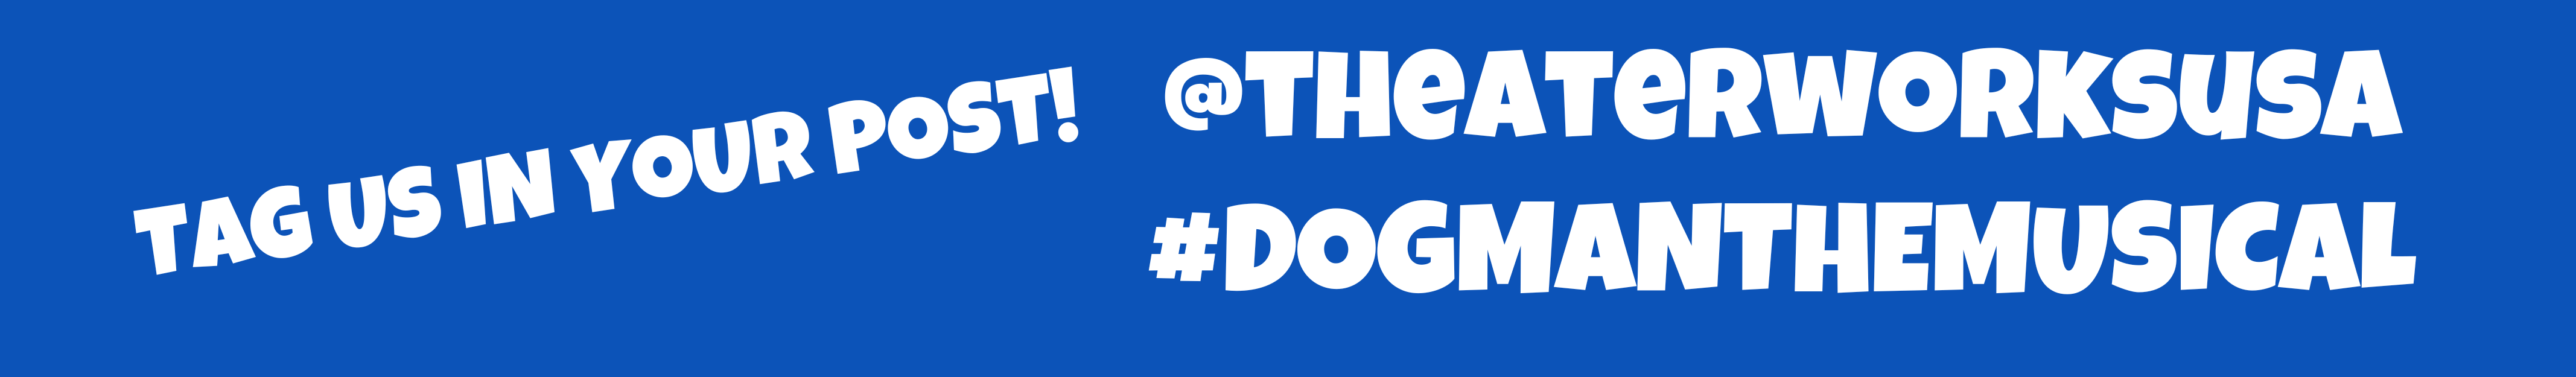 Tag us in your post! @TheaterWorksUSA #DogManTheMusical